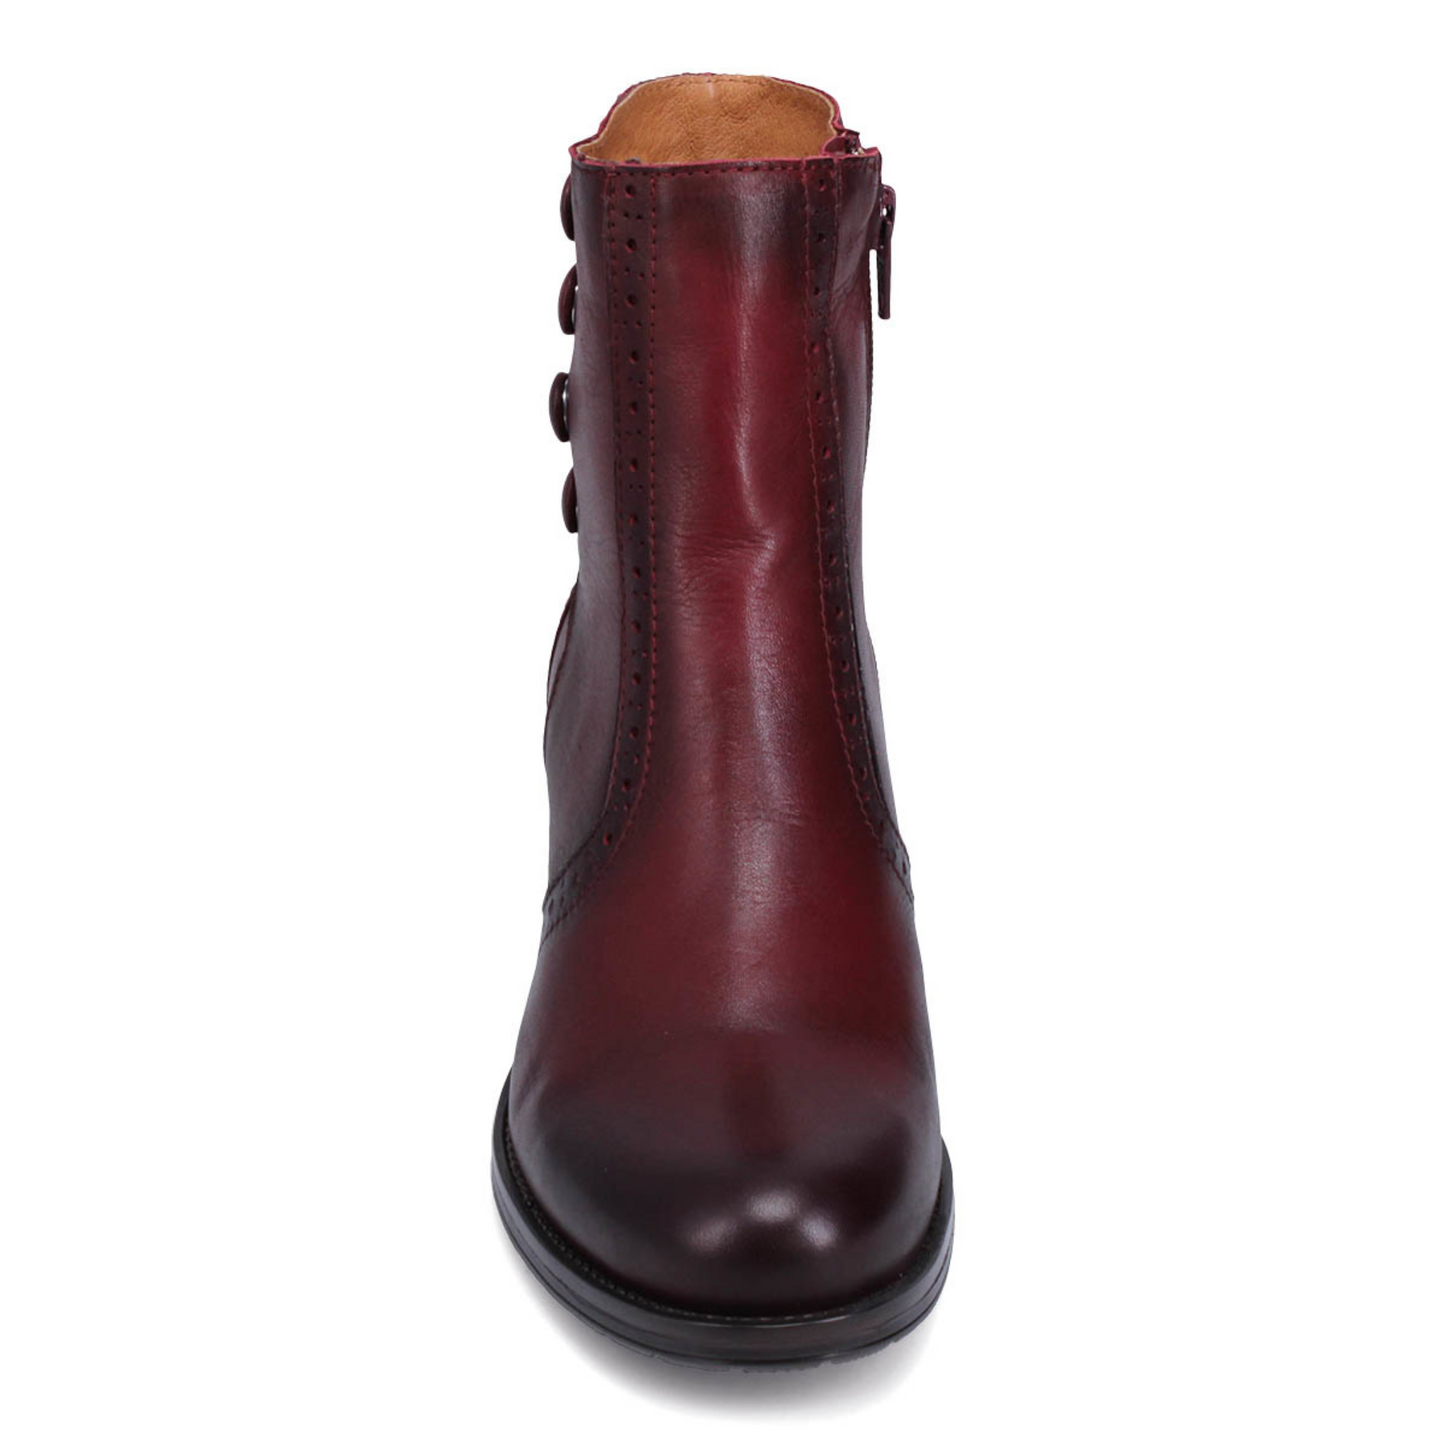 Front profile of the Miz Mooz Jake Boot in the colour Bordeaux.